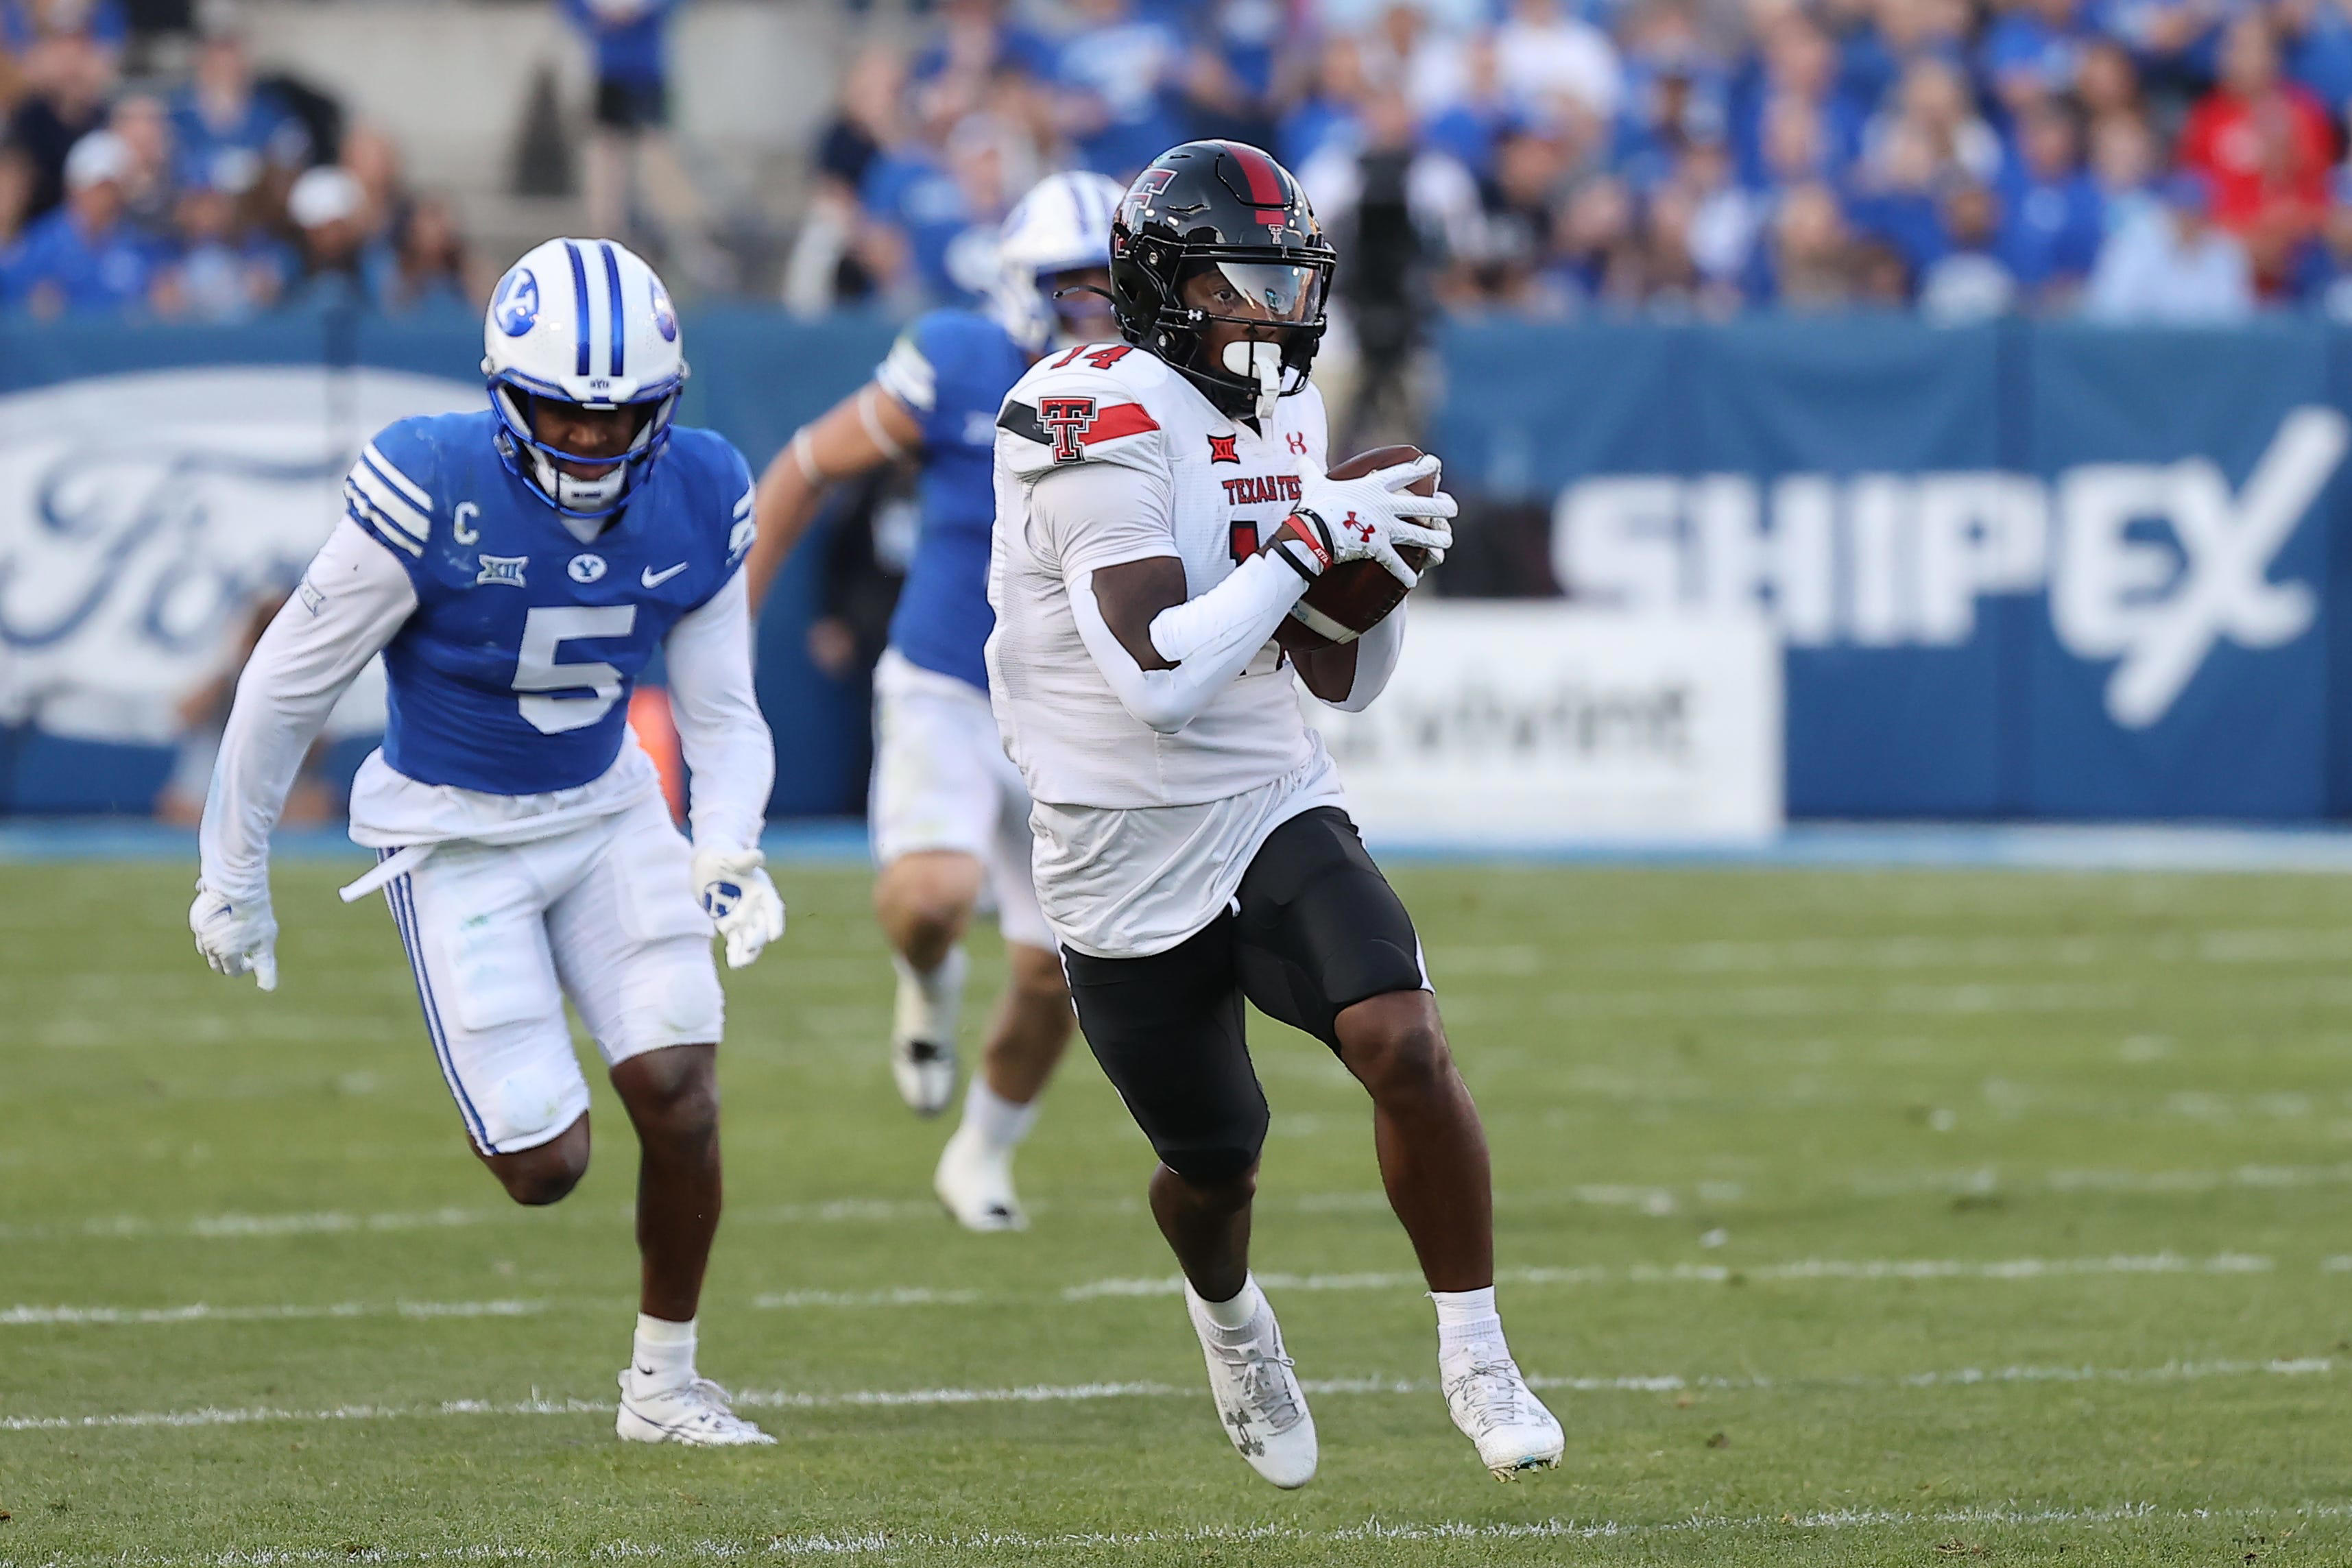 5 observations from Texas Tech football's 2714 loss to BYU